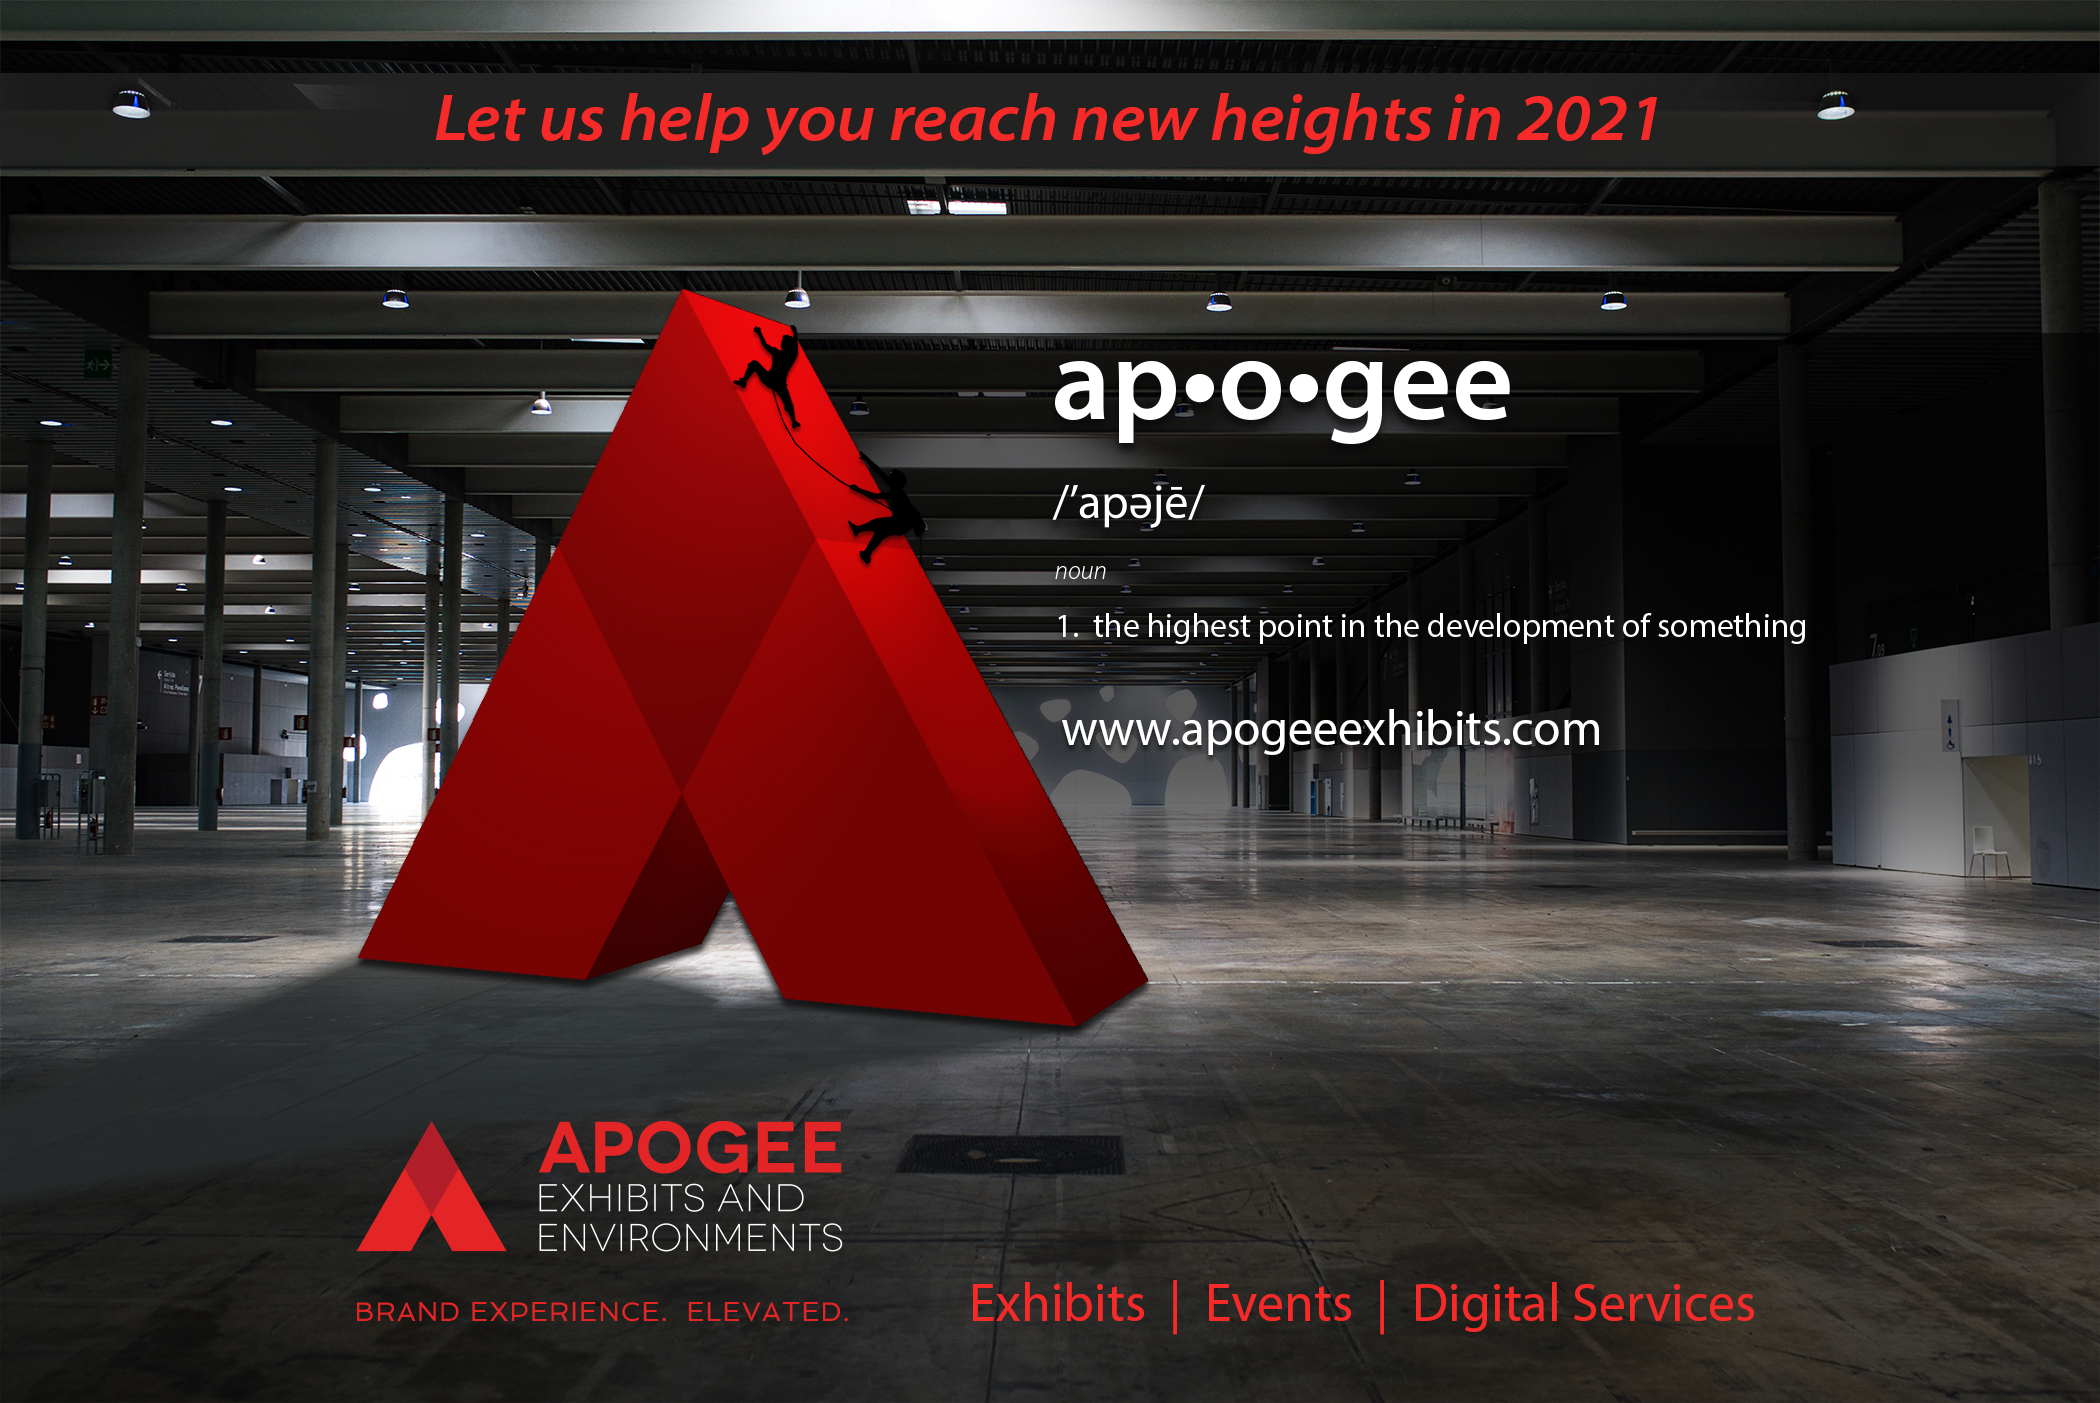 Apogee helps clients Elevate their brands